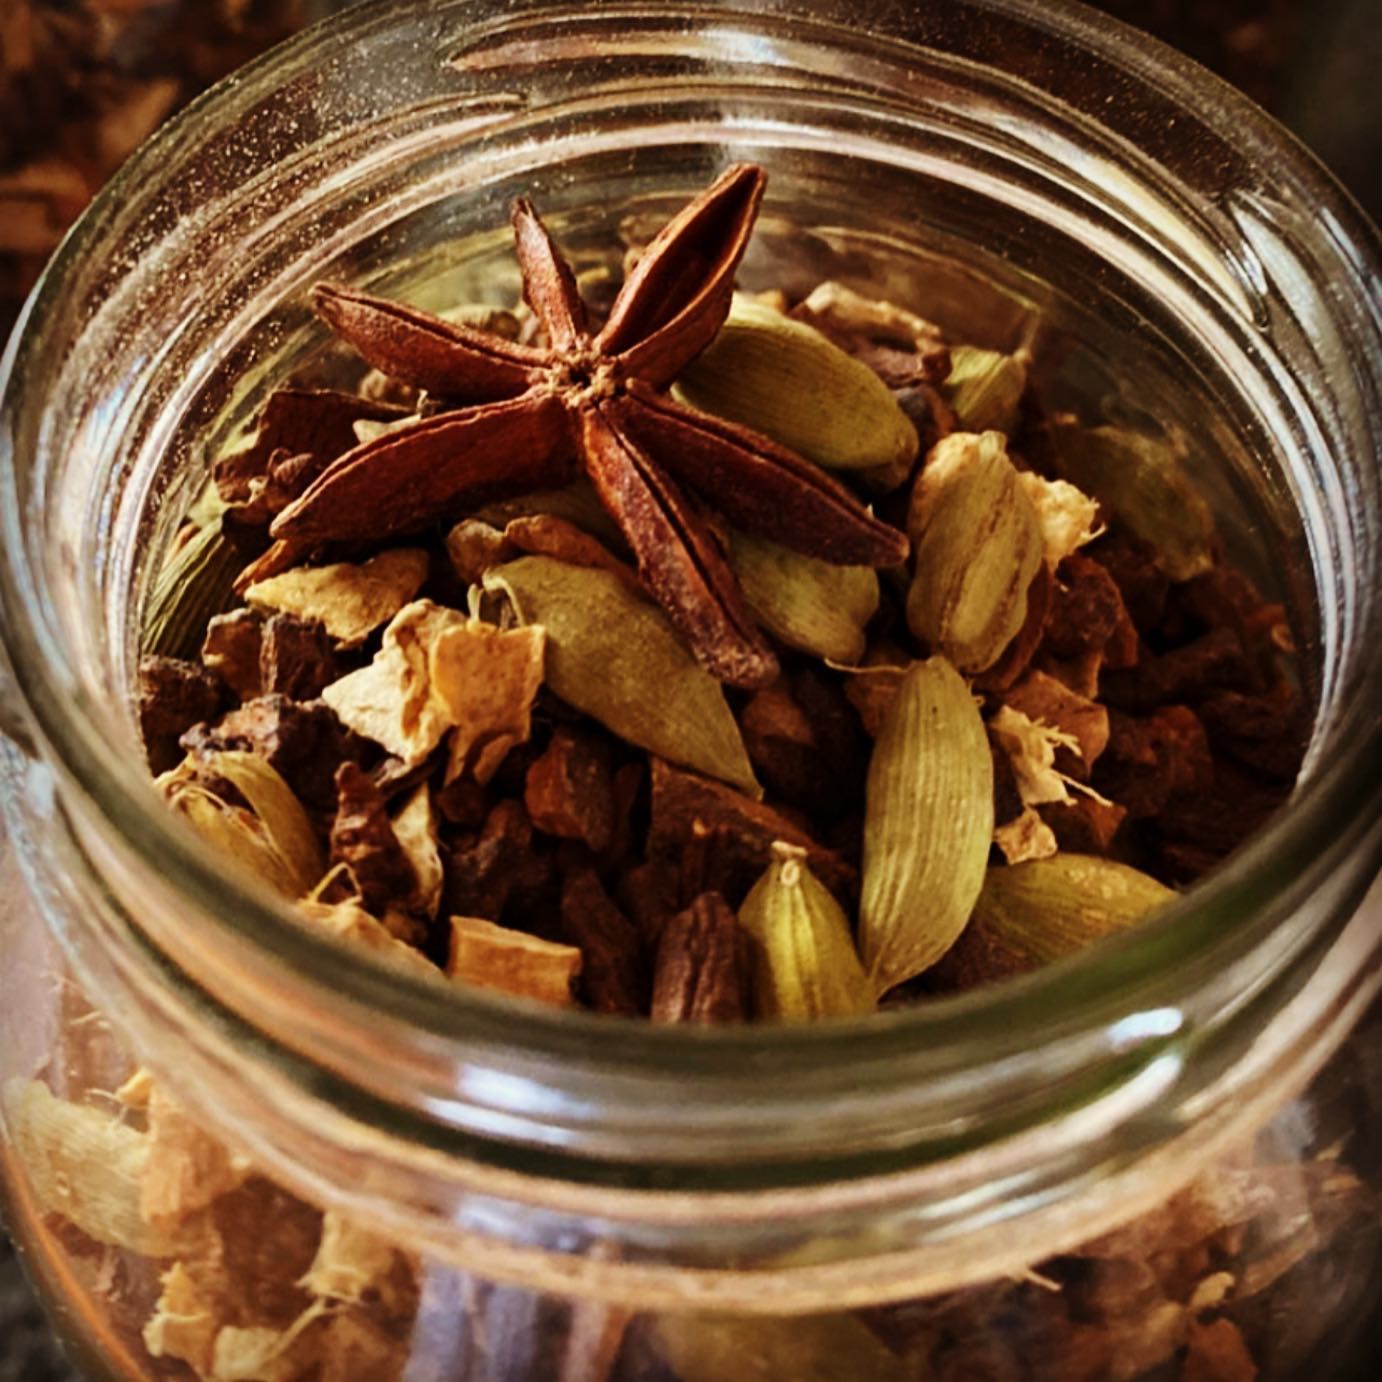 Have you tried our Dandelion Chai tea yet?